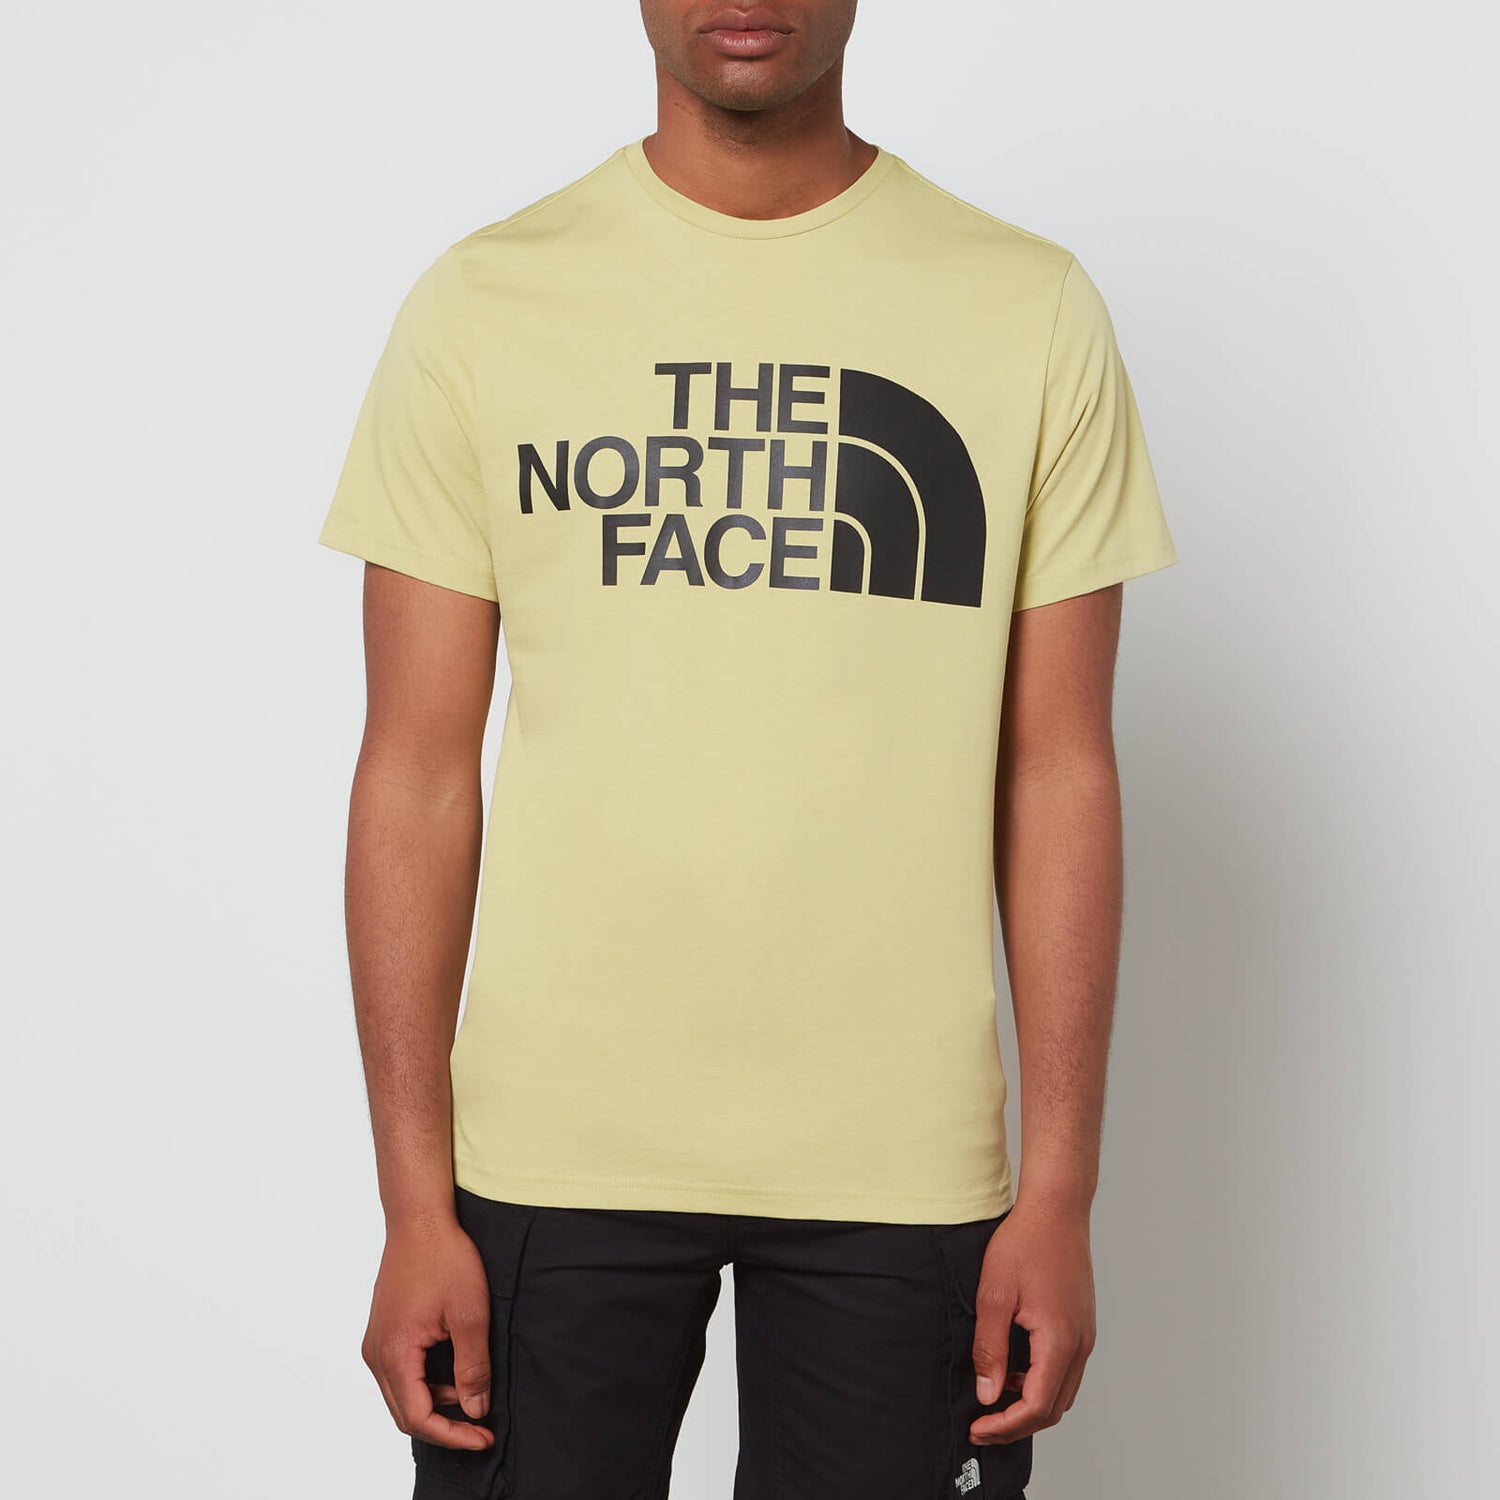 The North Face Men's Standard S/S T-Shirt -Weeping Willow - S